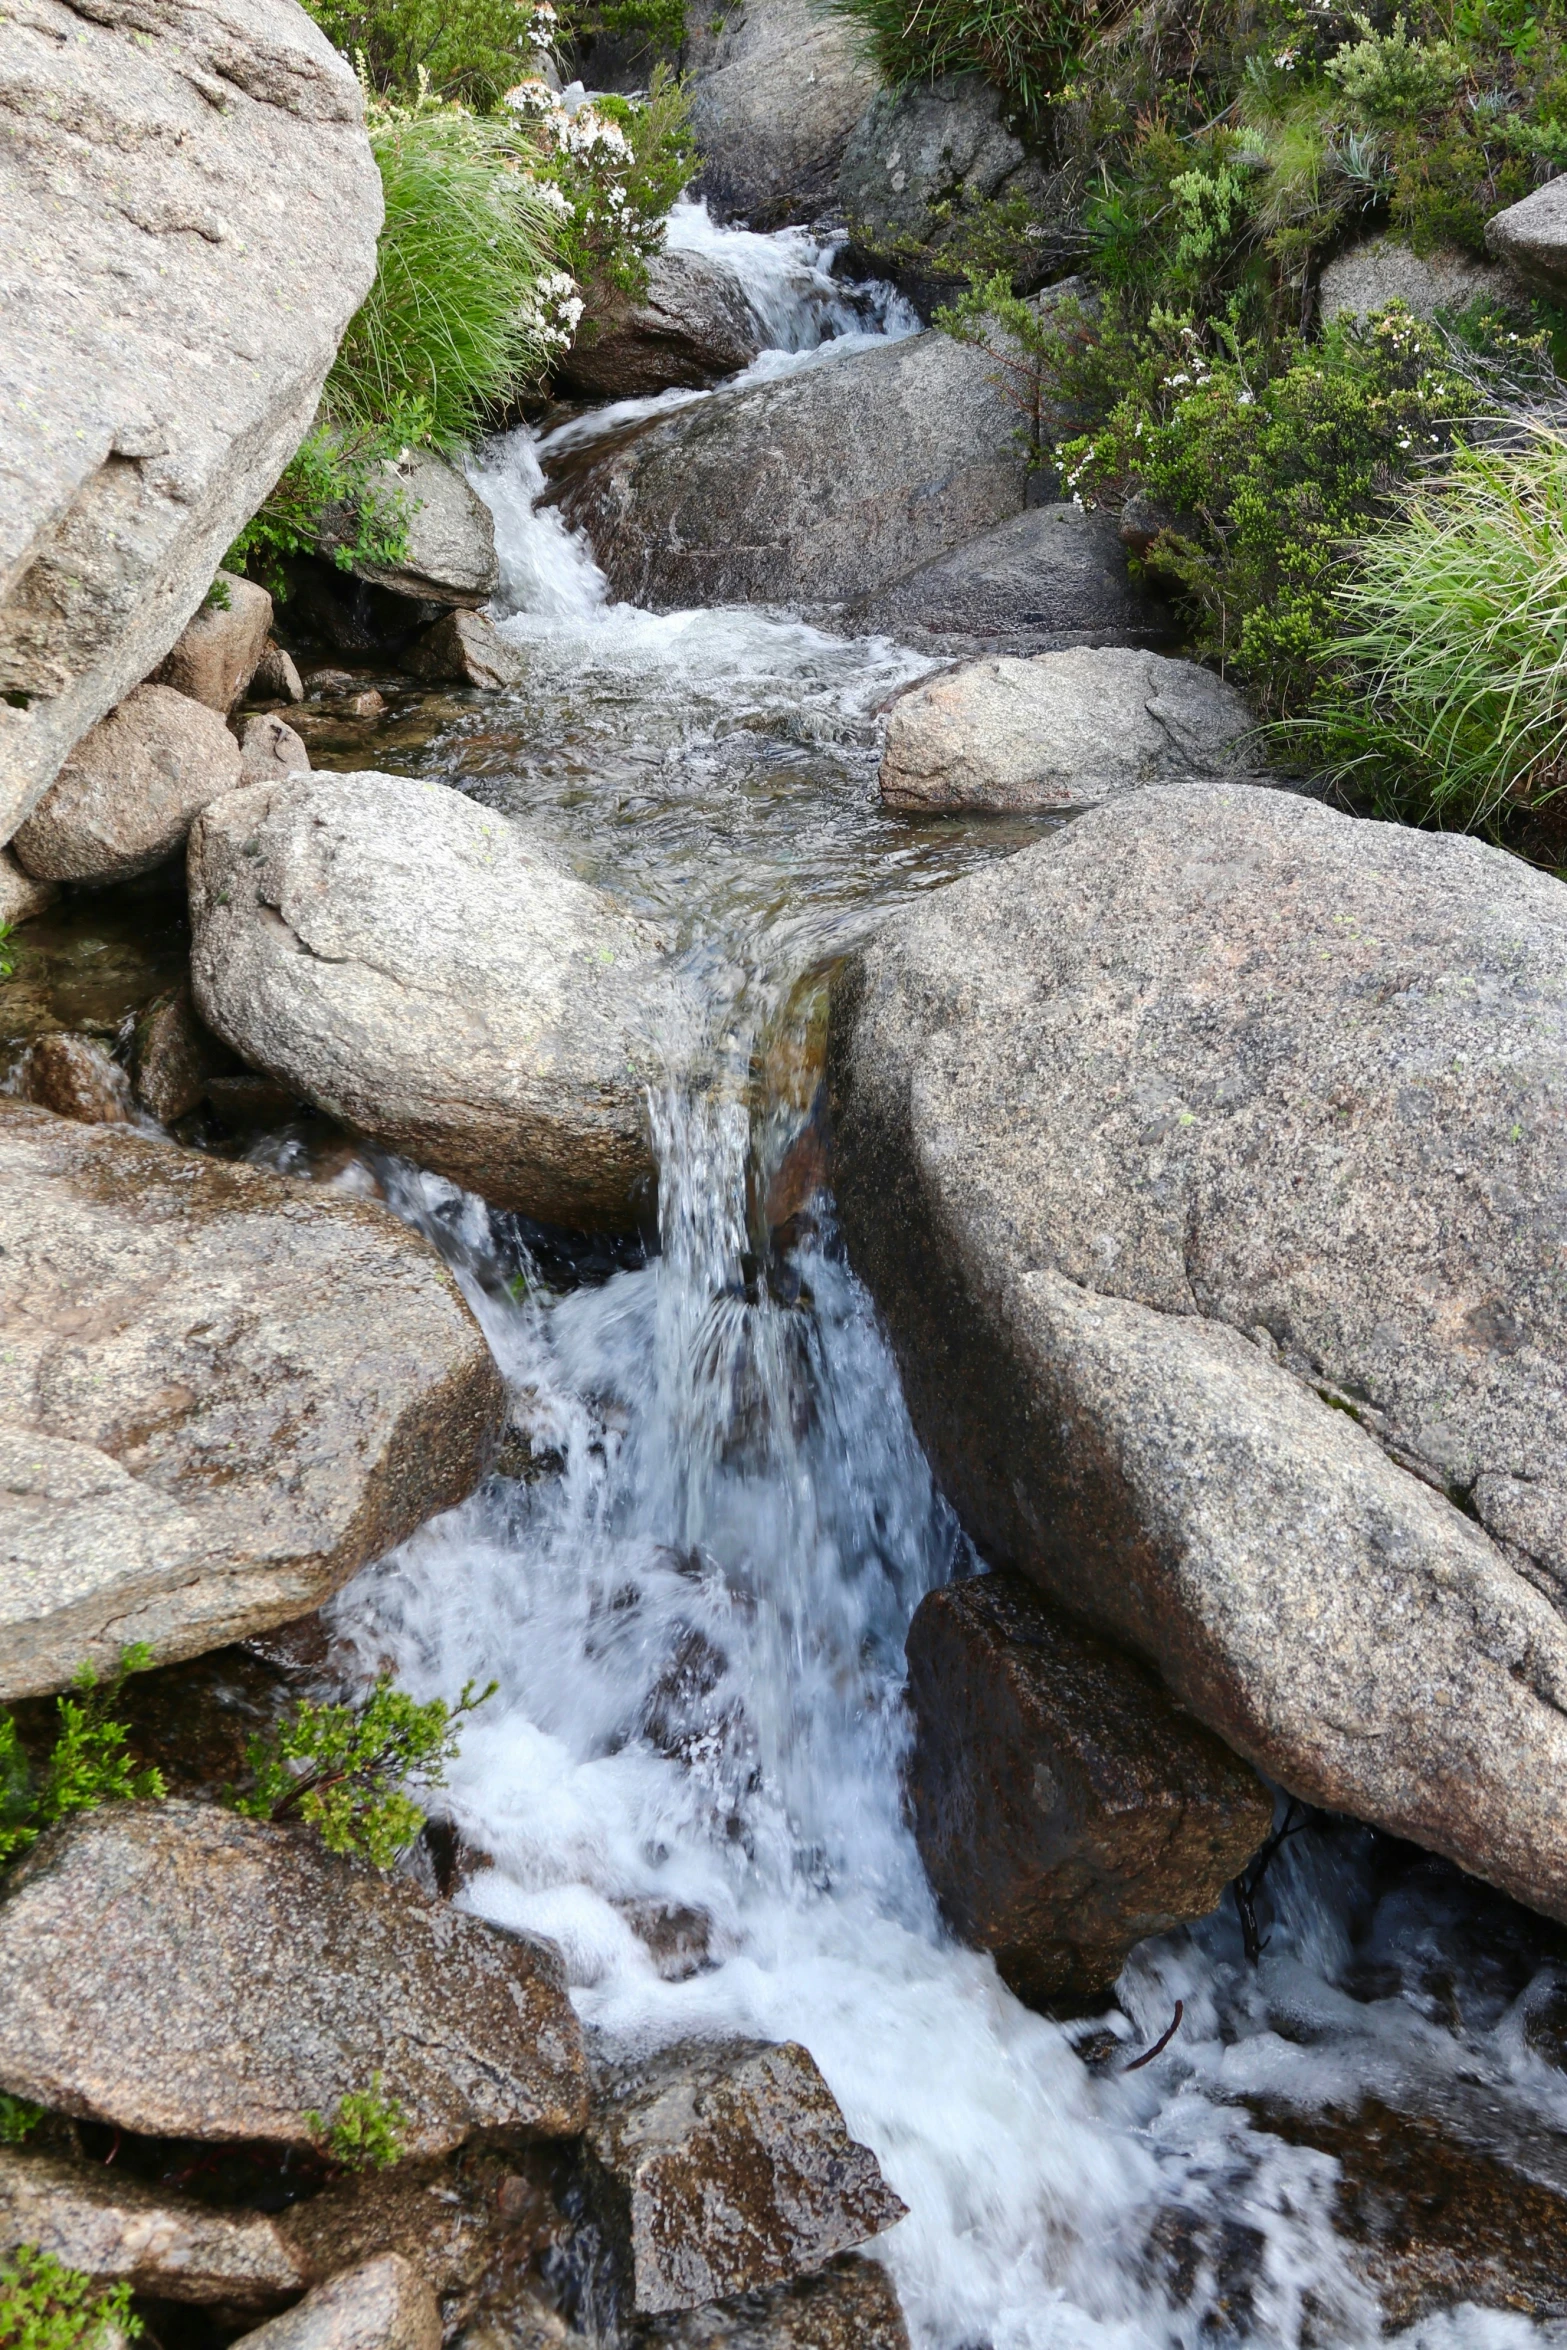 there is a stream of water running through some rocks